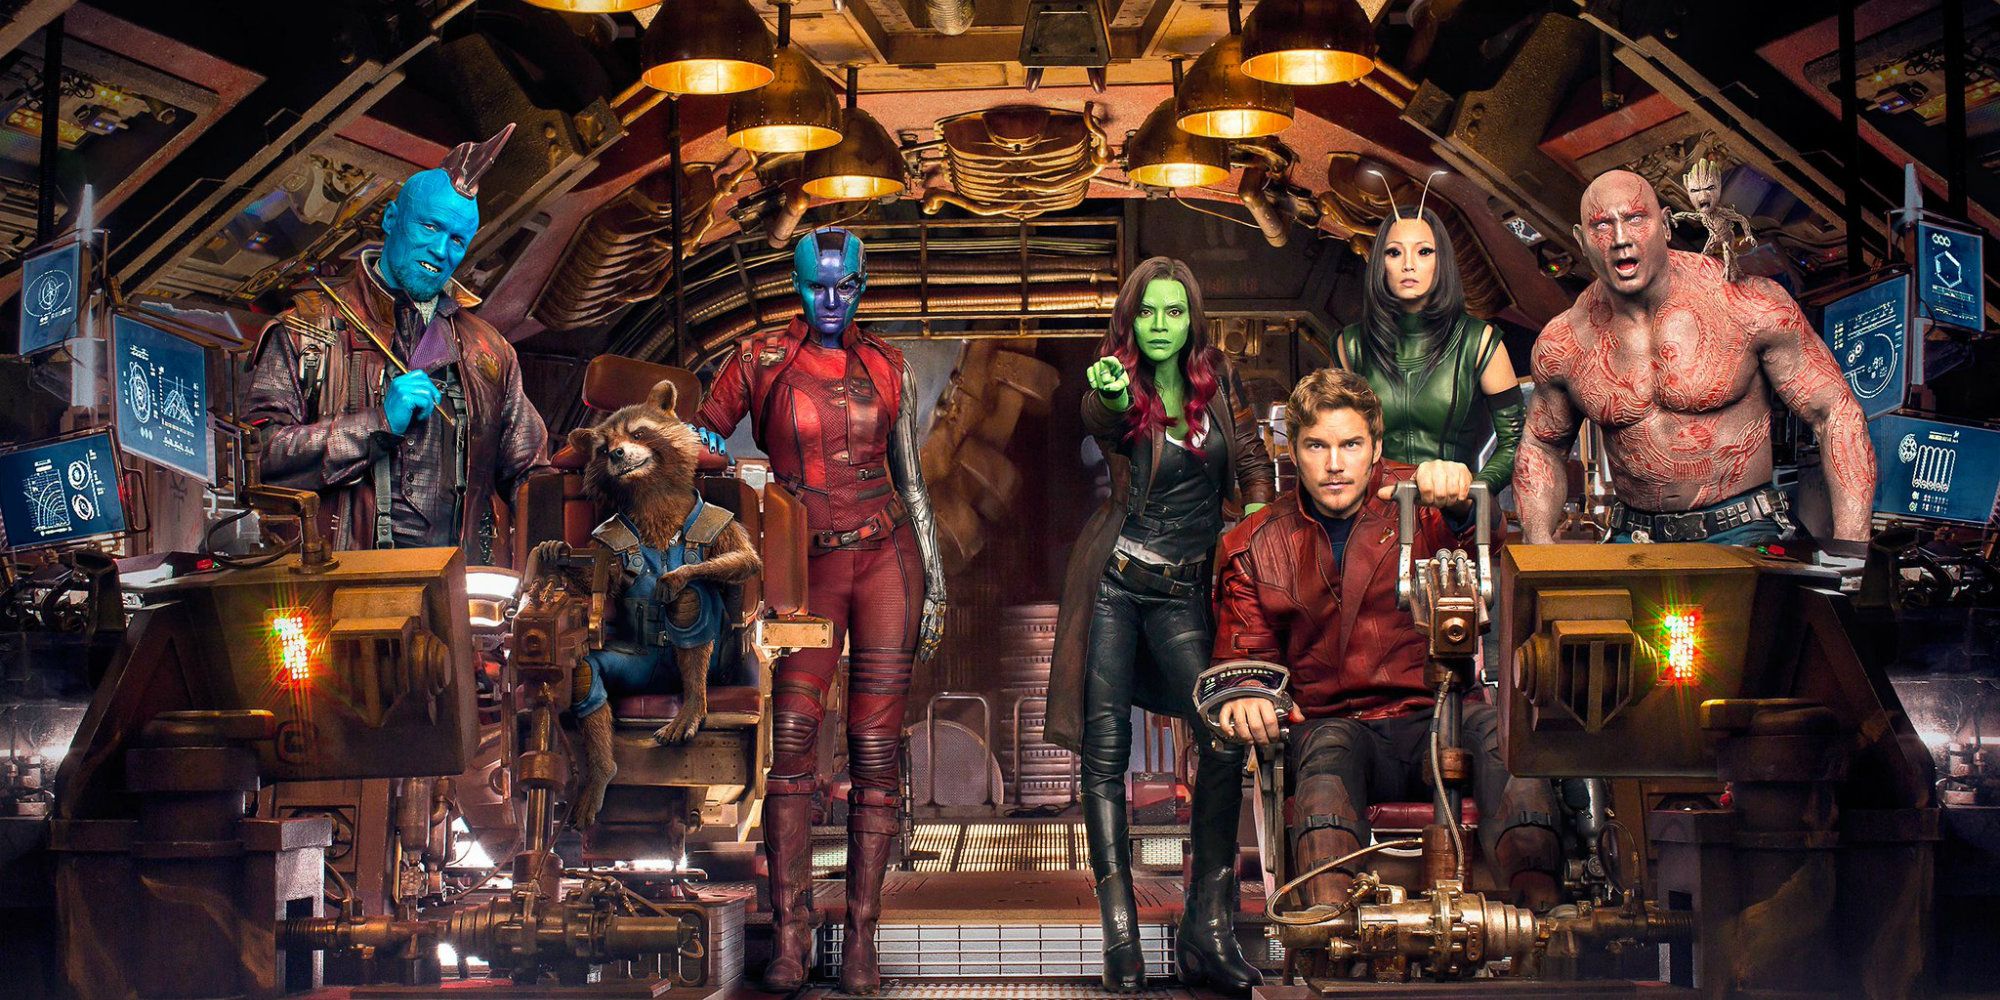 All the Guardians of the Galaxy standing together in Vol 2.